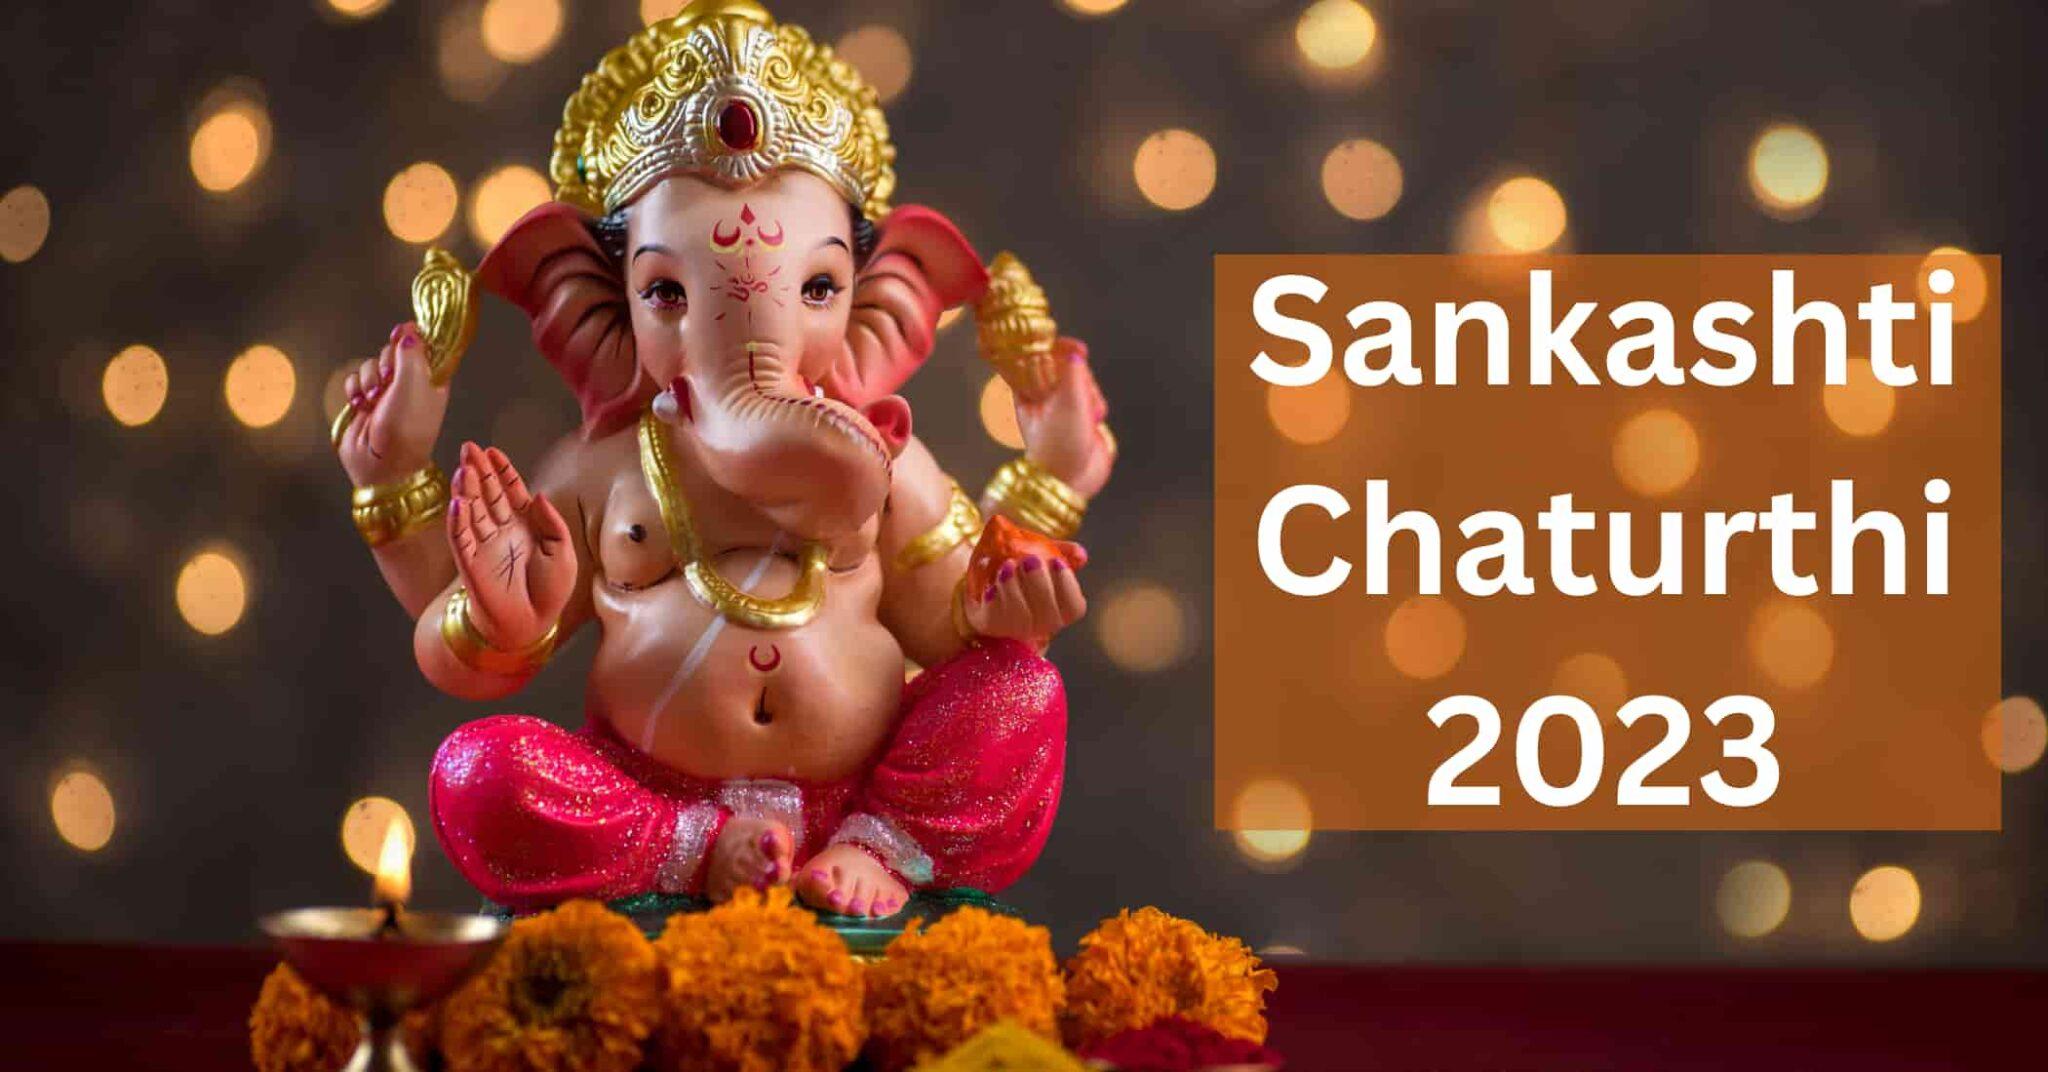 Sankashti Chaturthi 2023 List of Dates and Times Complete Guide